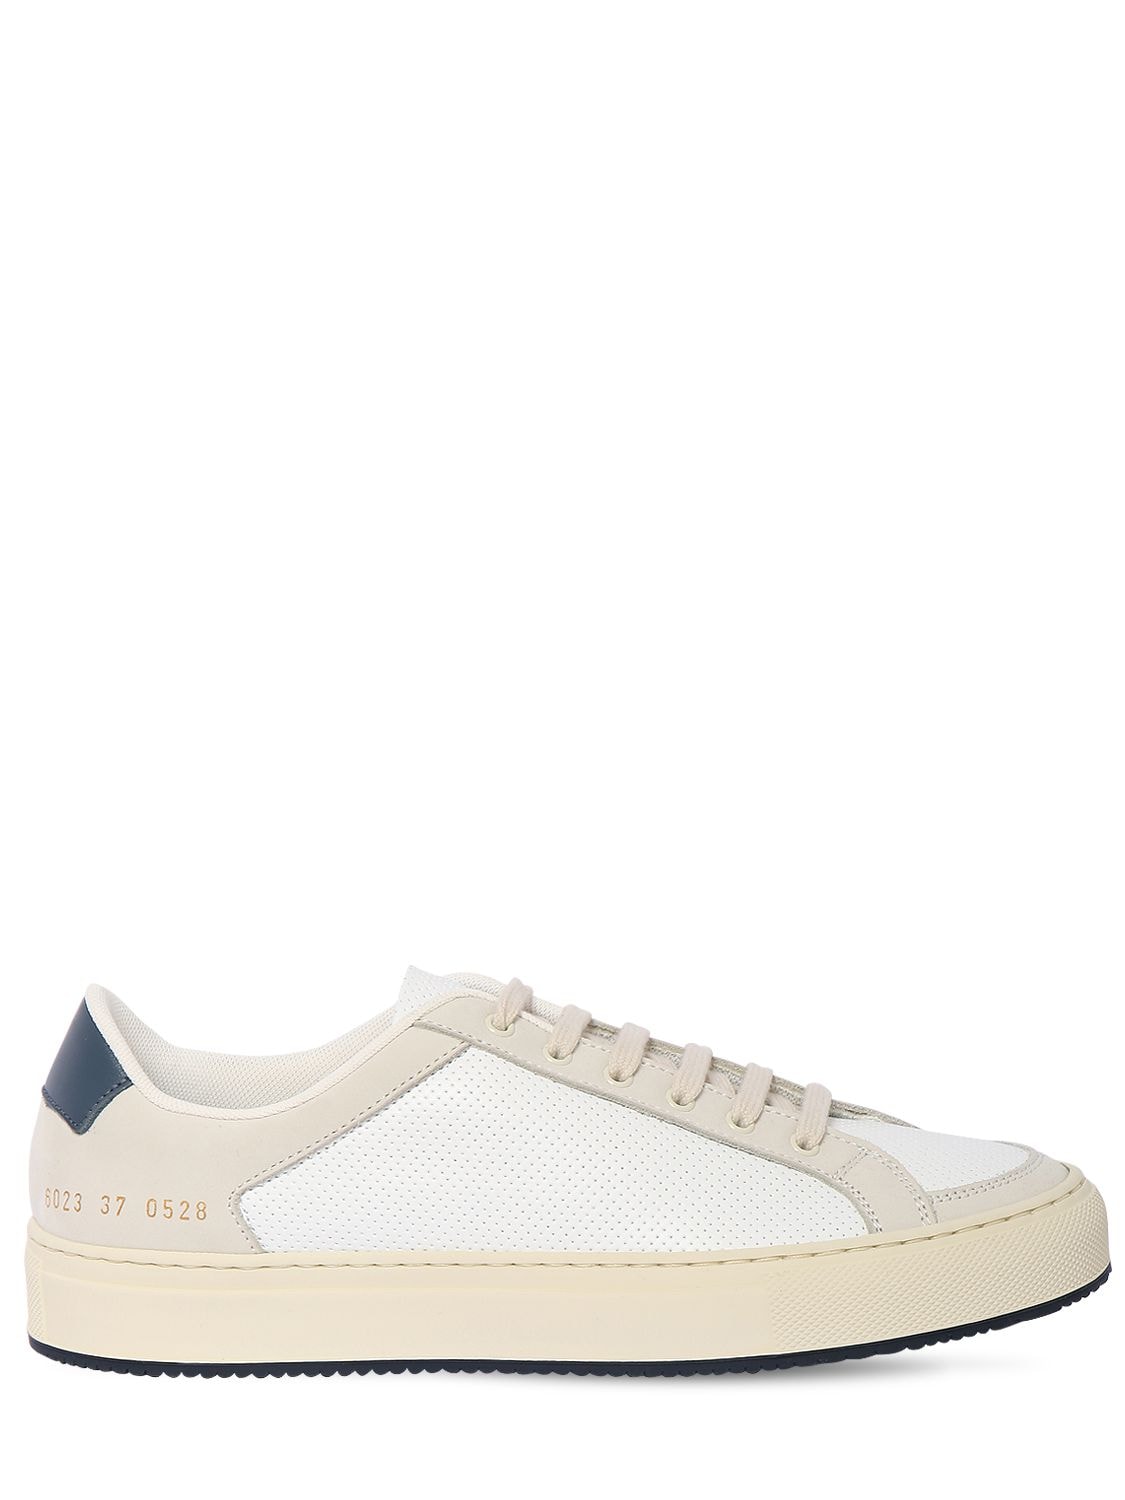 COMMON PROJECTS 20MM RETRO LOW 70S LEATHER SNEAKERS,71IVR7006-MDUYOA2